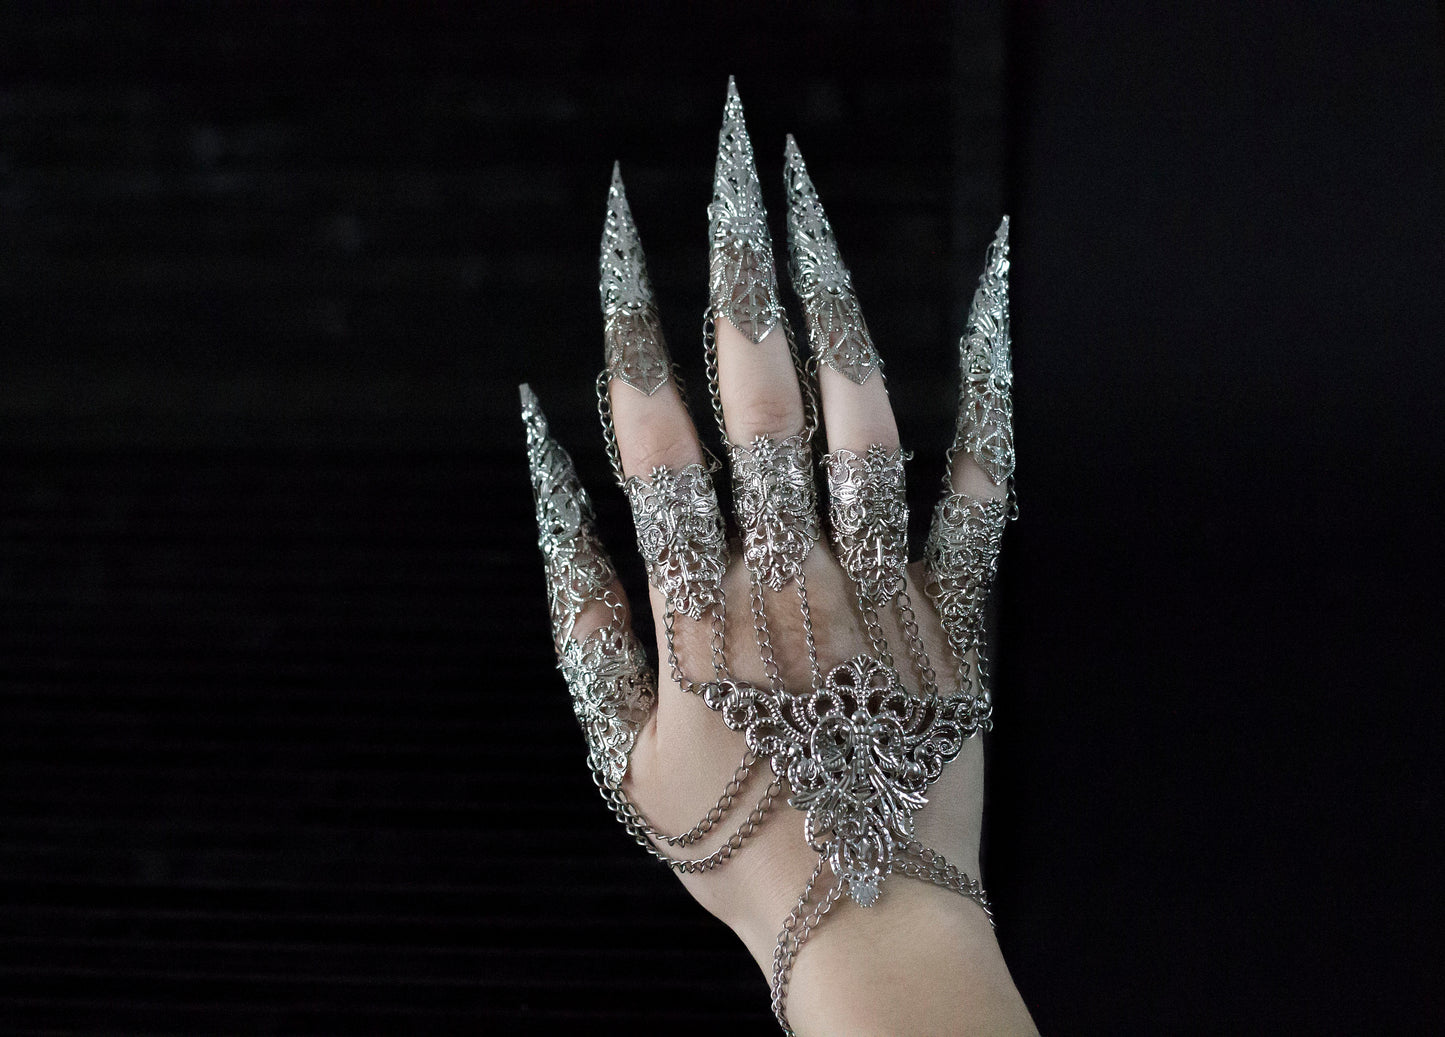 A hand adorned with an intricate silver Metal Glove Diablo, featuring detailed filigree work and sharp, elongated fingertip designs, connected by delicate chains that add a gothic elegance to the piece, set against a dark background.